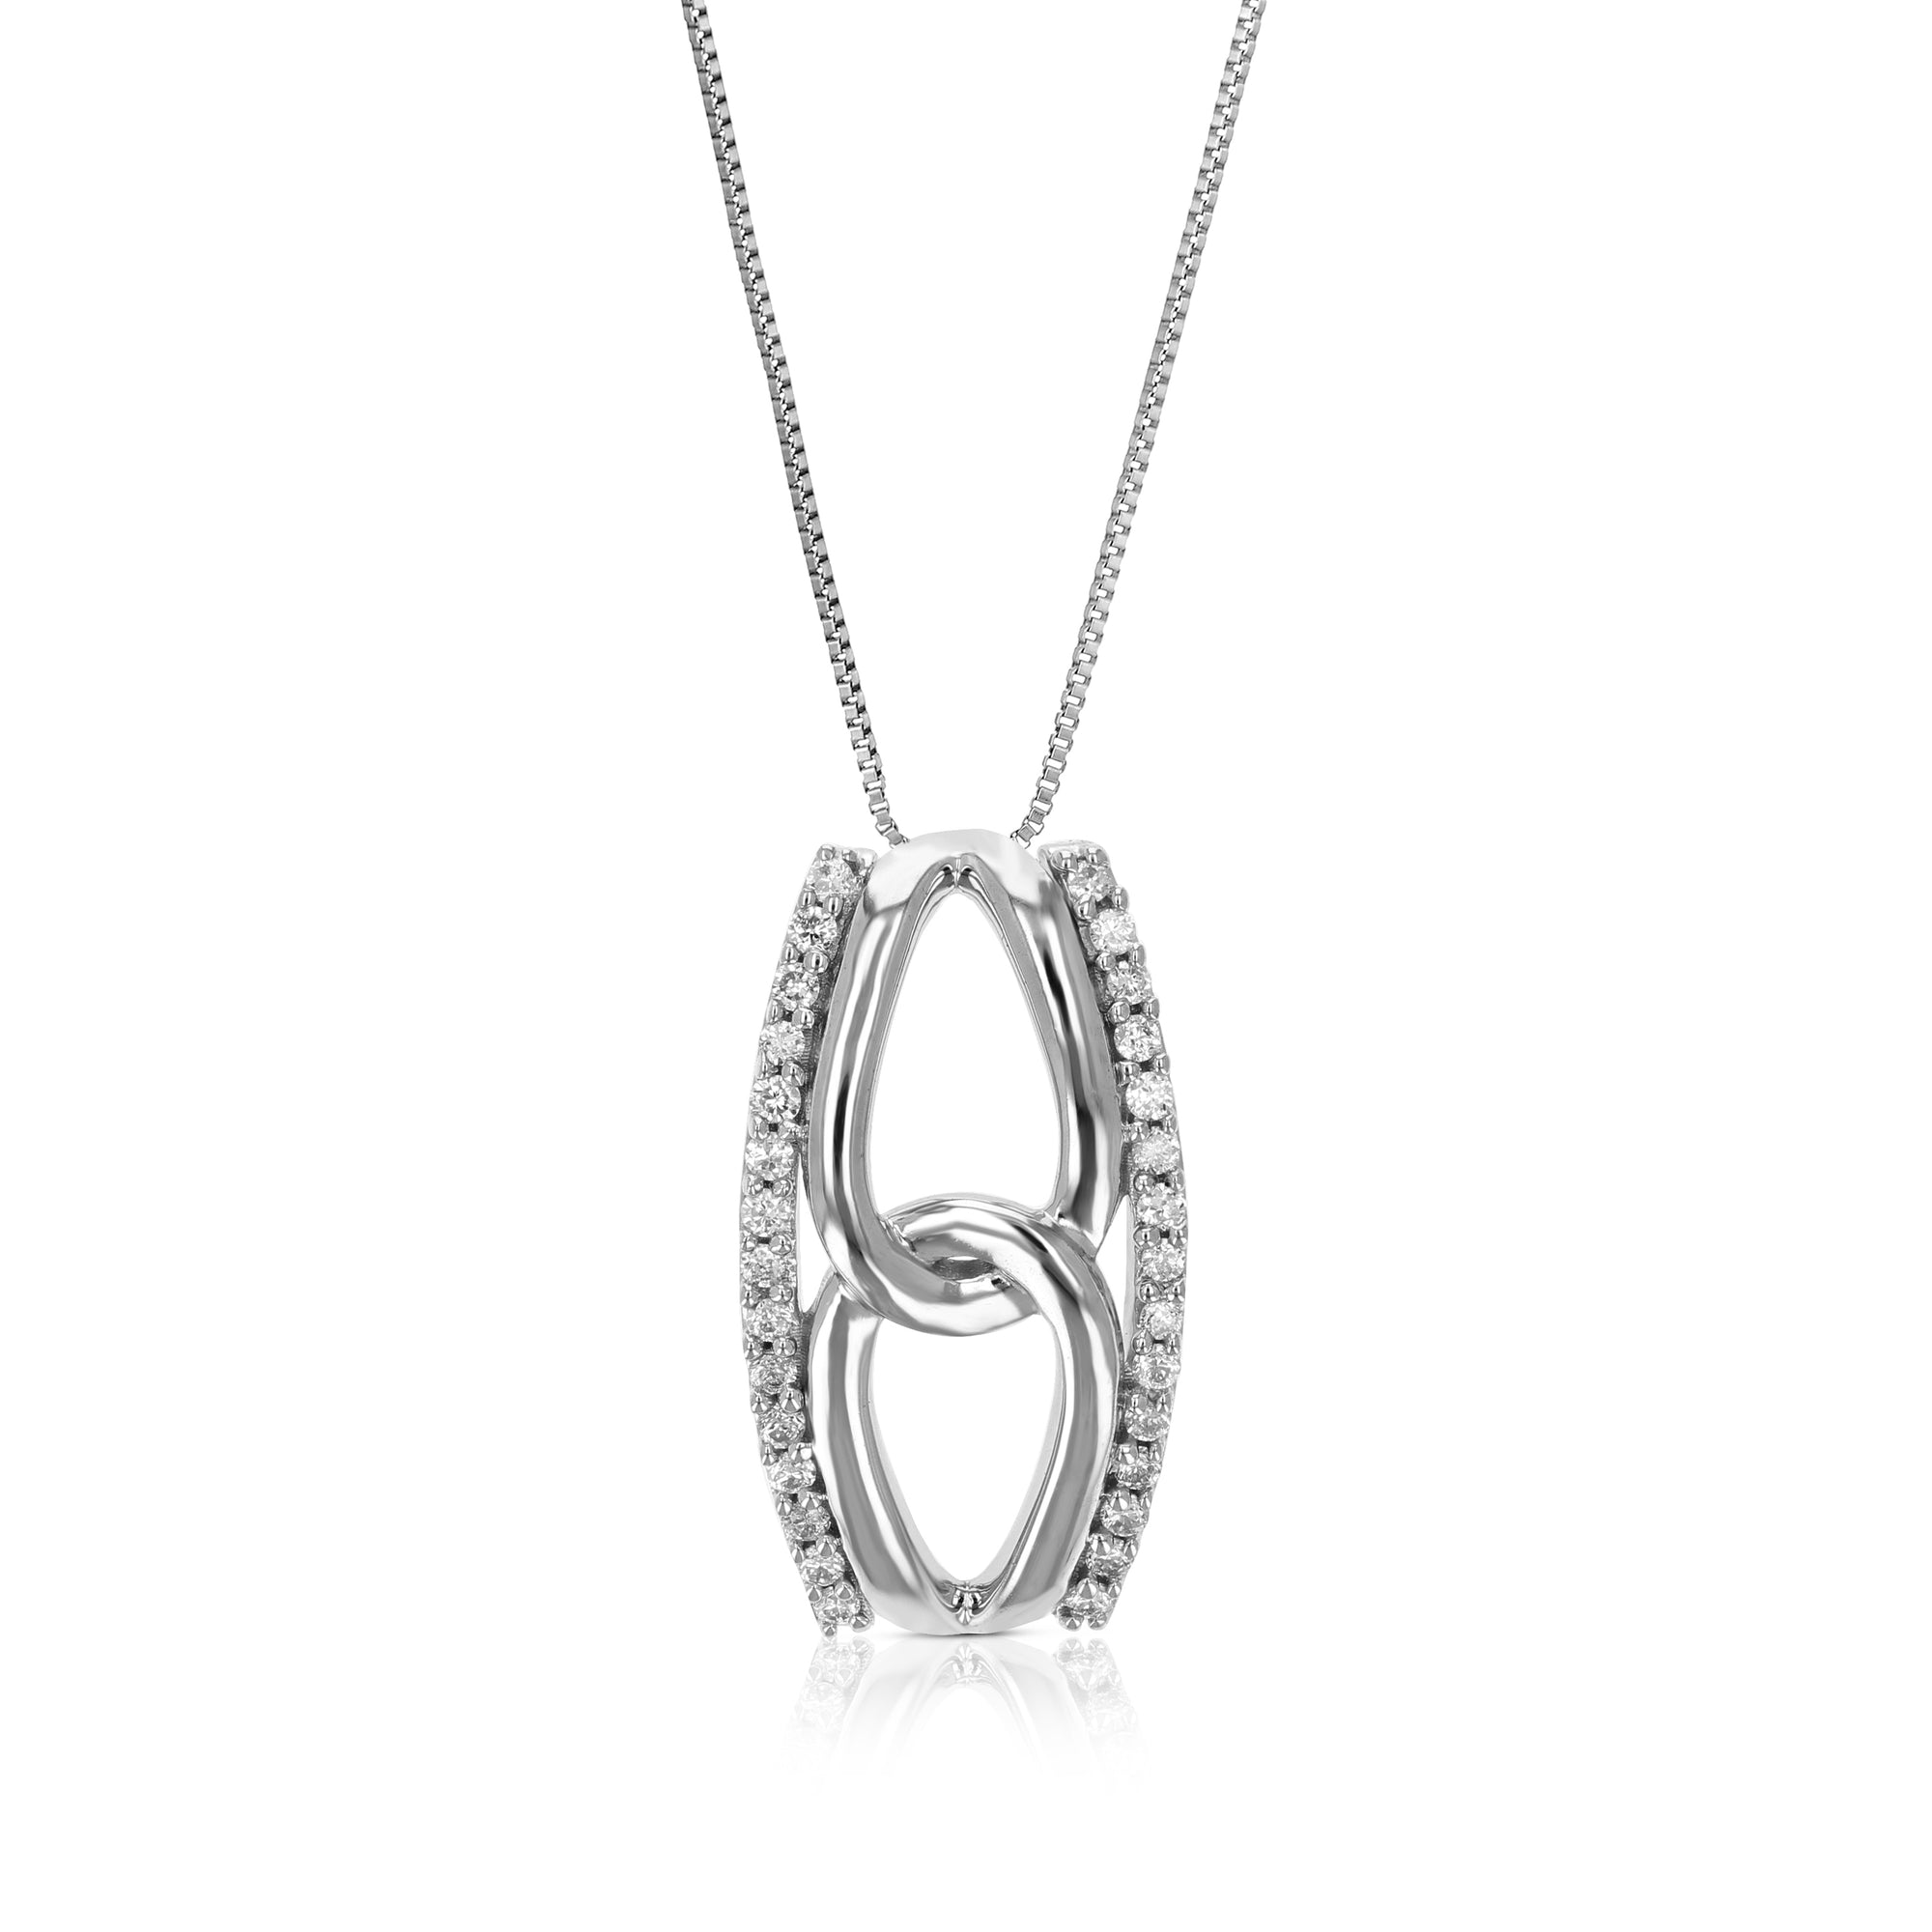 1/10 cttw Lab Grown Diamond Fashion Pendant Necklace .925 Sterling Silver 1/2 Inch with 18 Inch Chain, Size 1/2 Inch